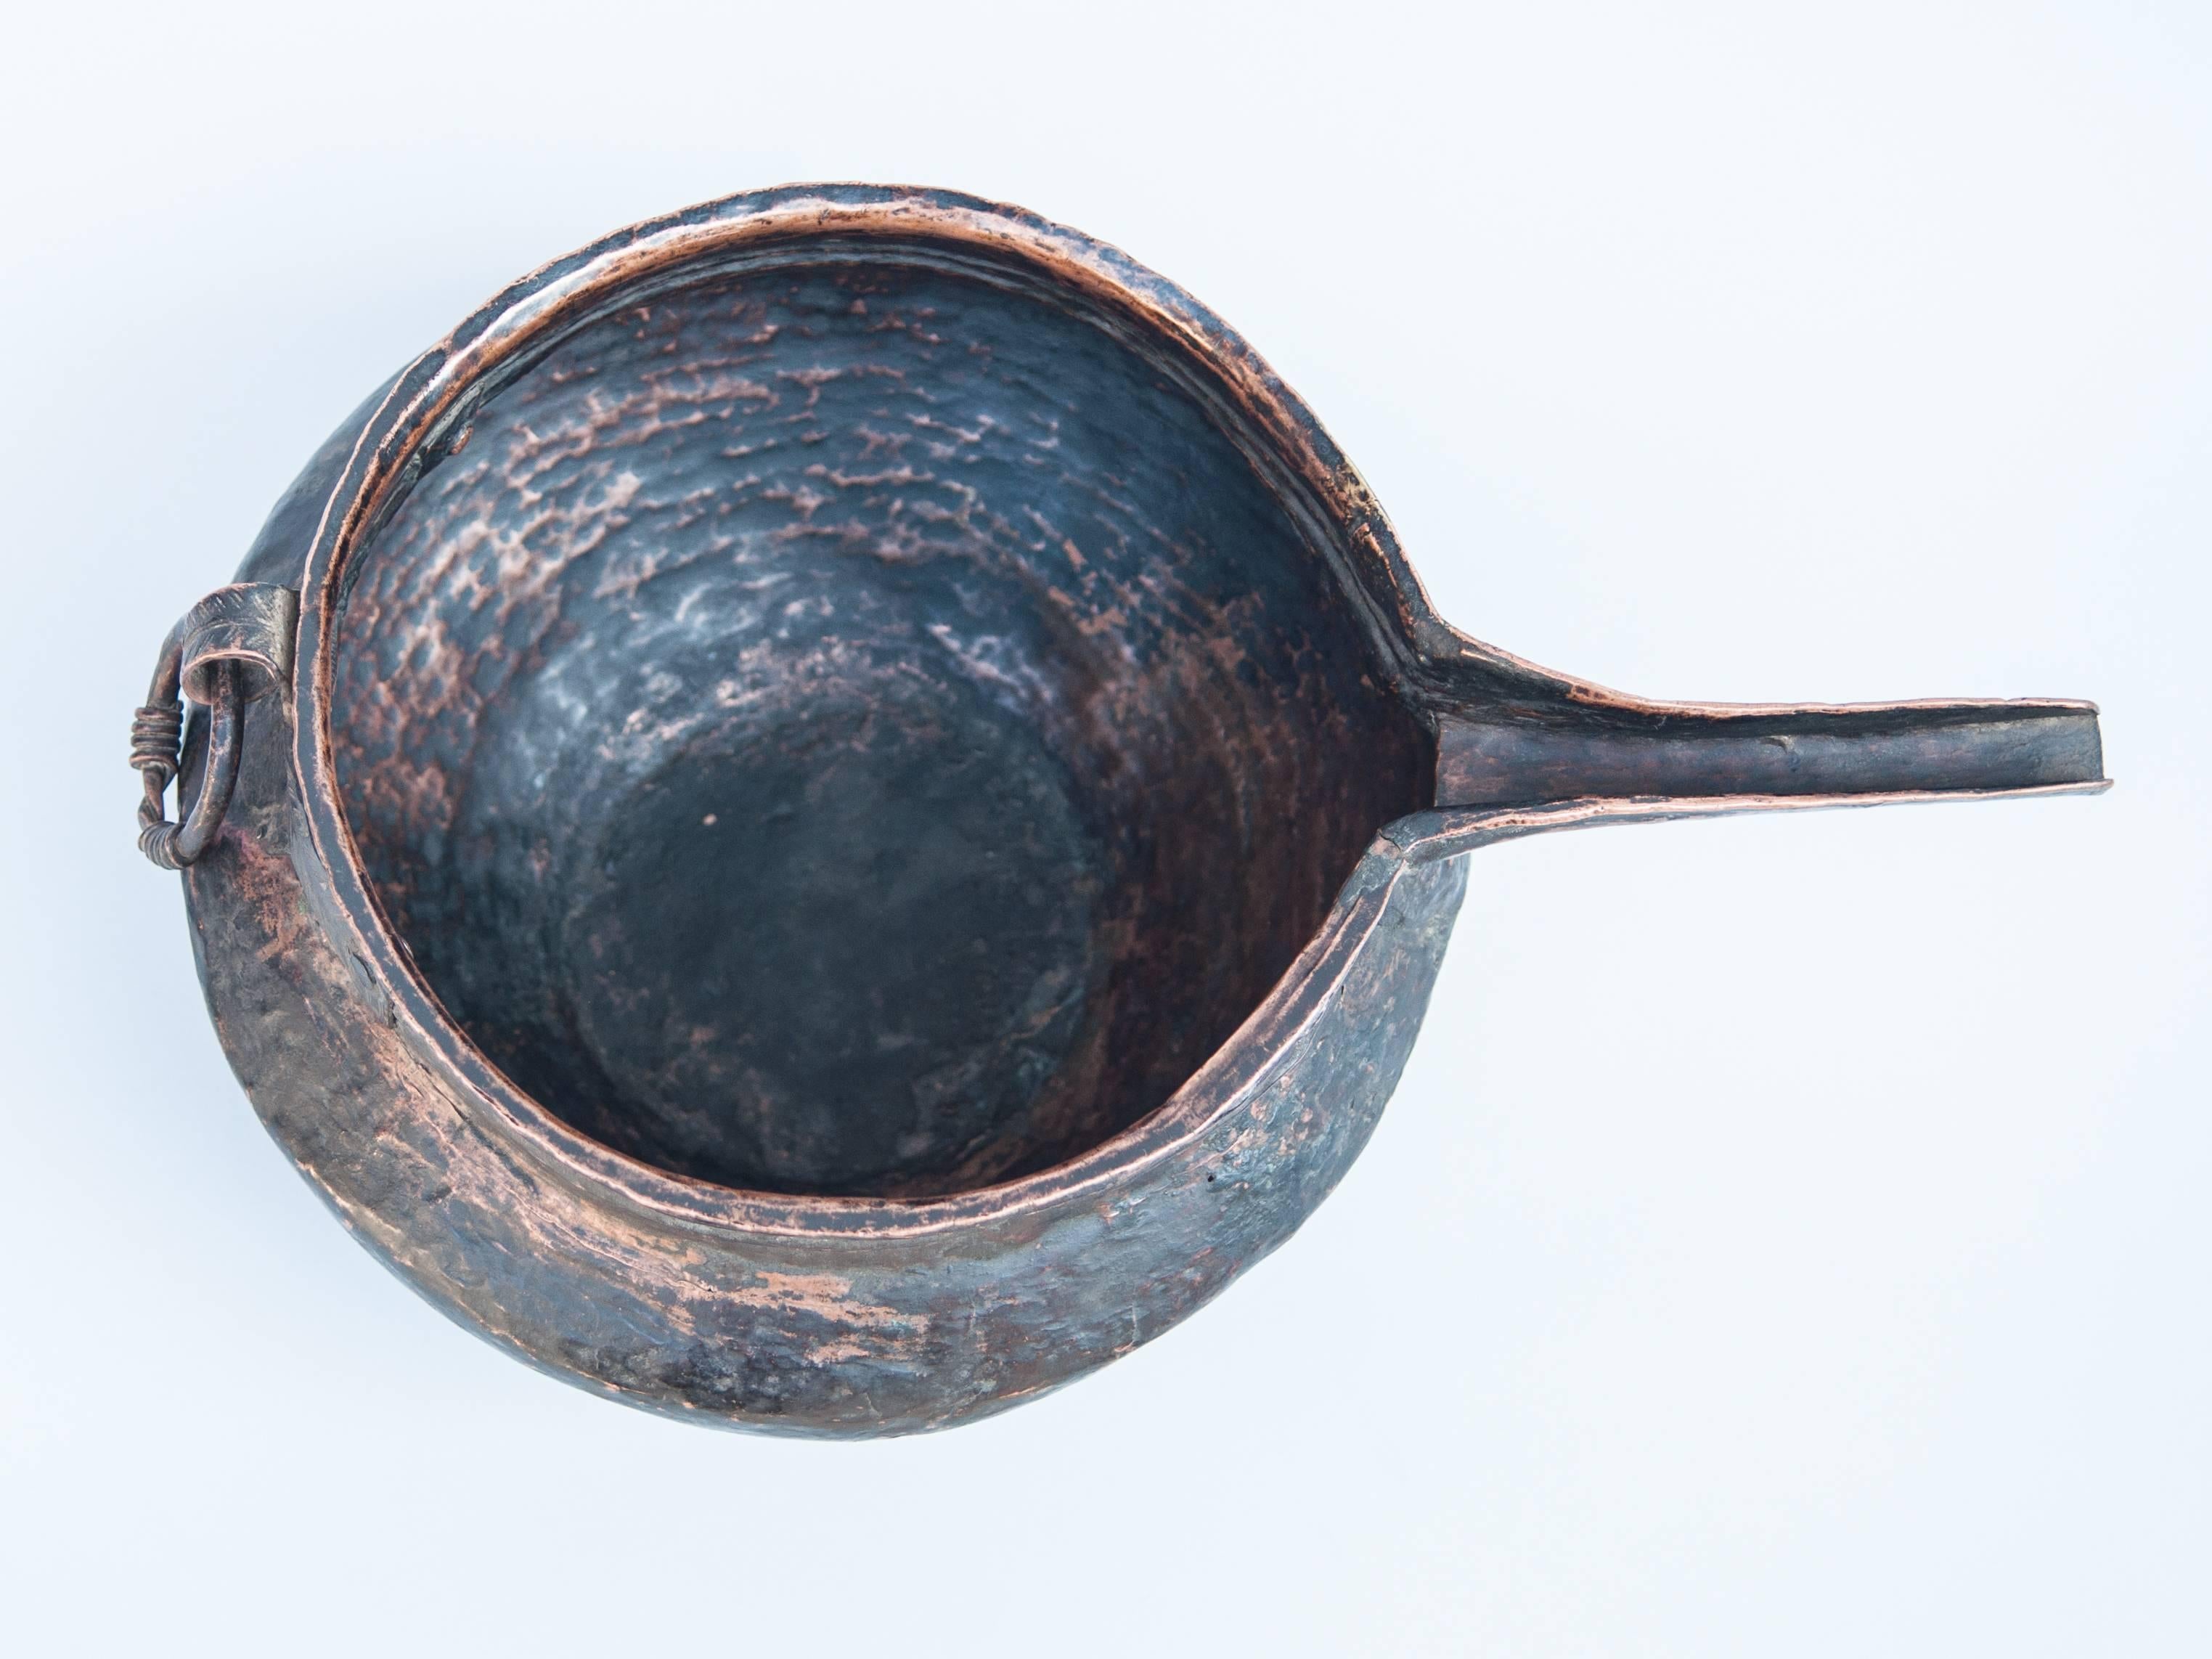 Tibetan Copper Pot with Spout, Hand-Hammered, Tibet, Mid-20th Century